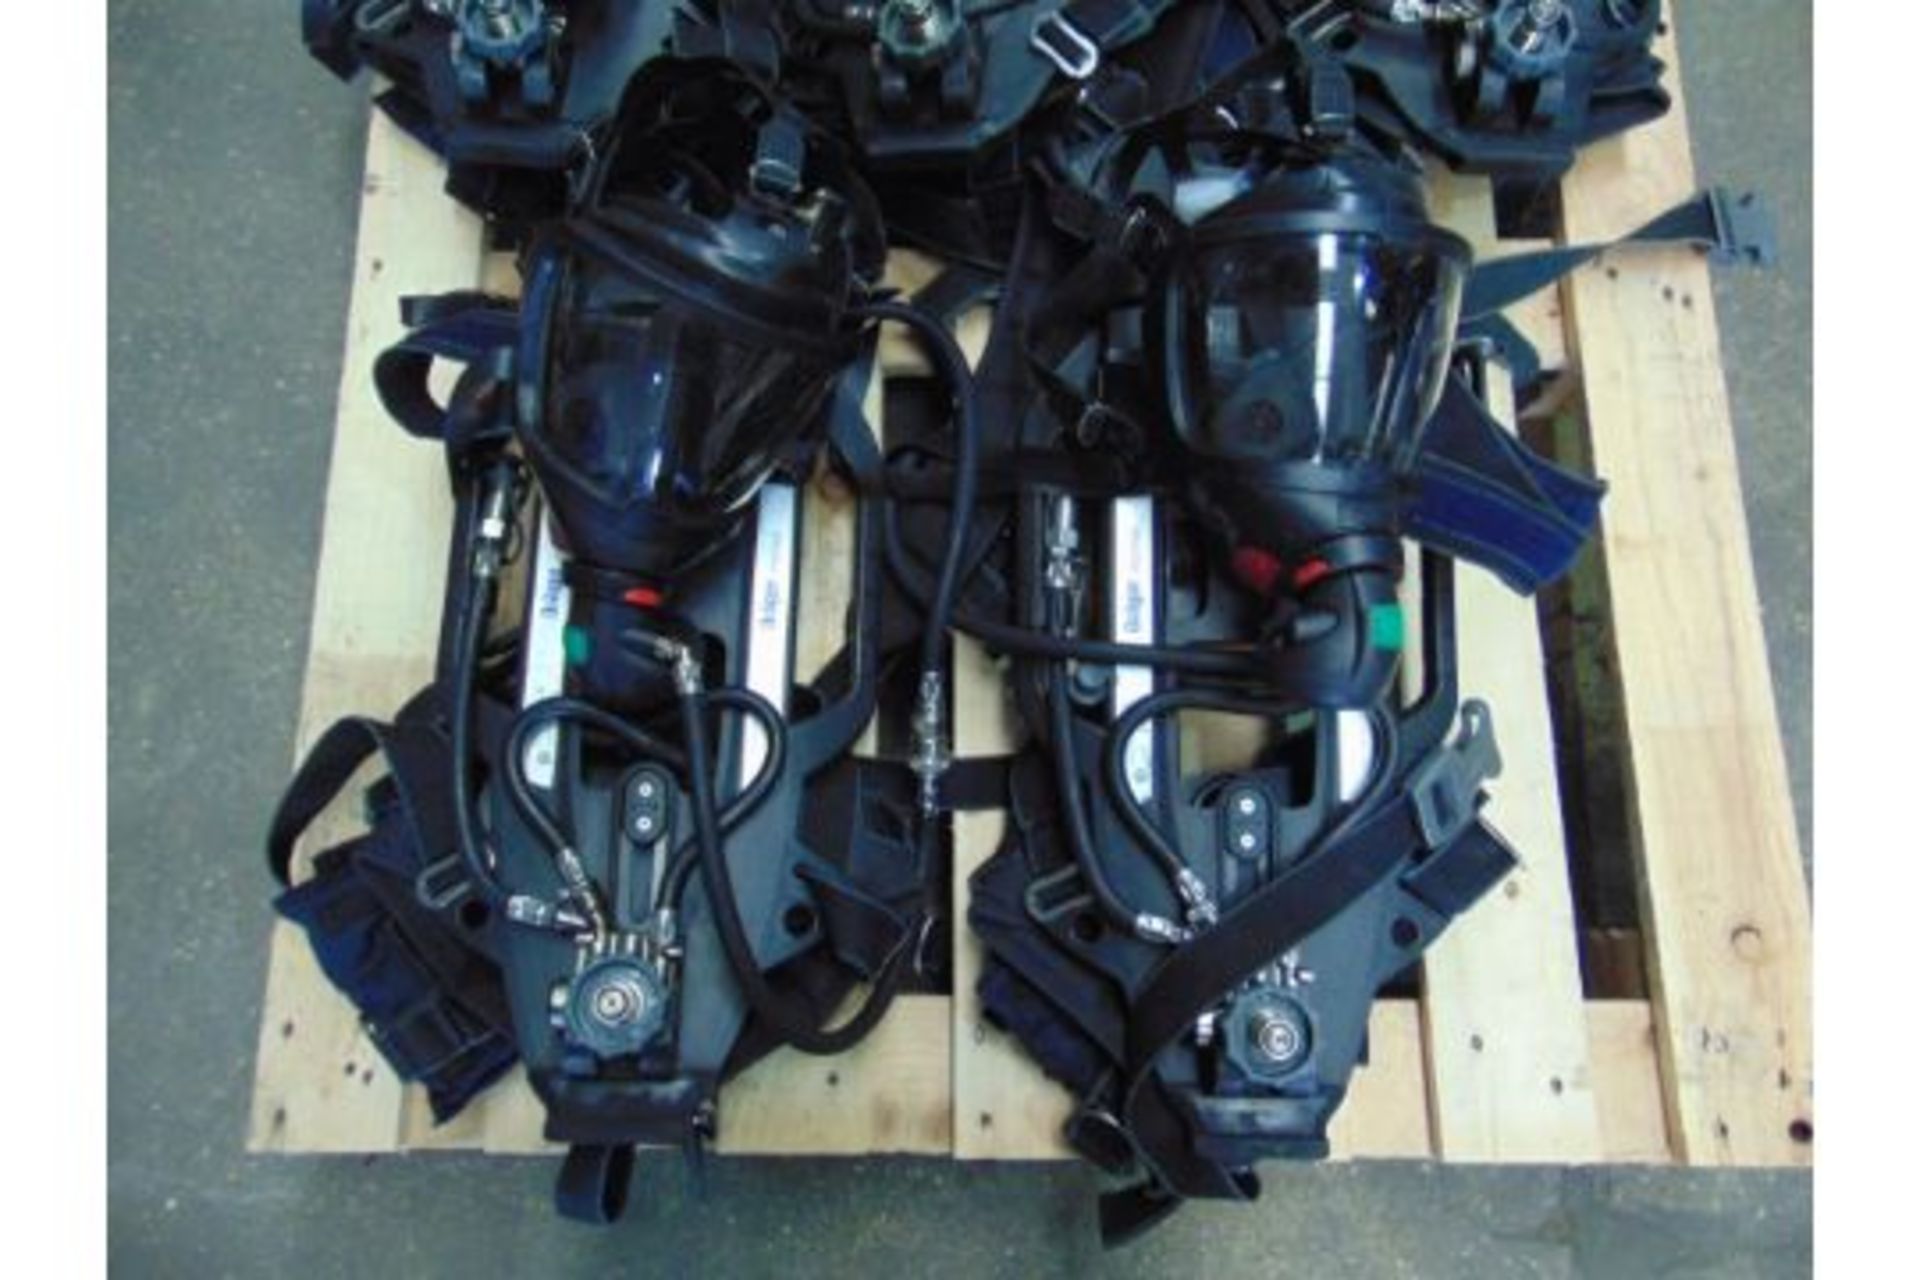 5 x Drager PSS 7000 Self Contained Breathing Apparatus w/ 10 x Drager 300 Bar Air Cylinders - Image 9 of 28